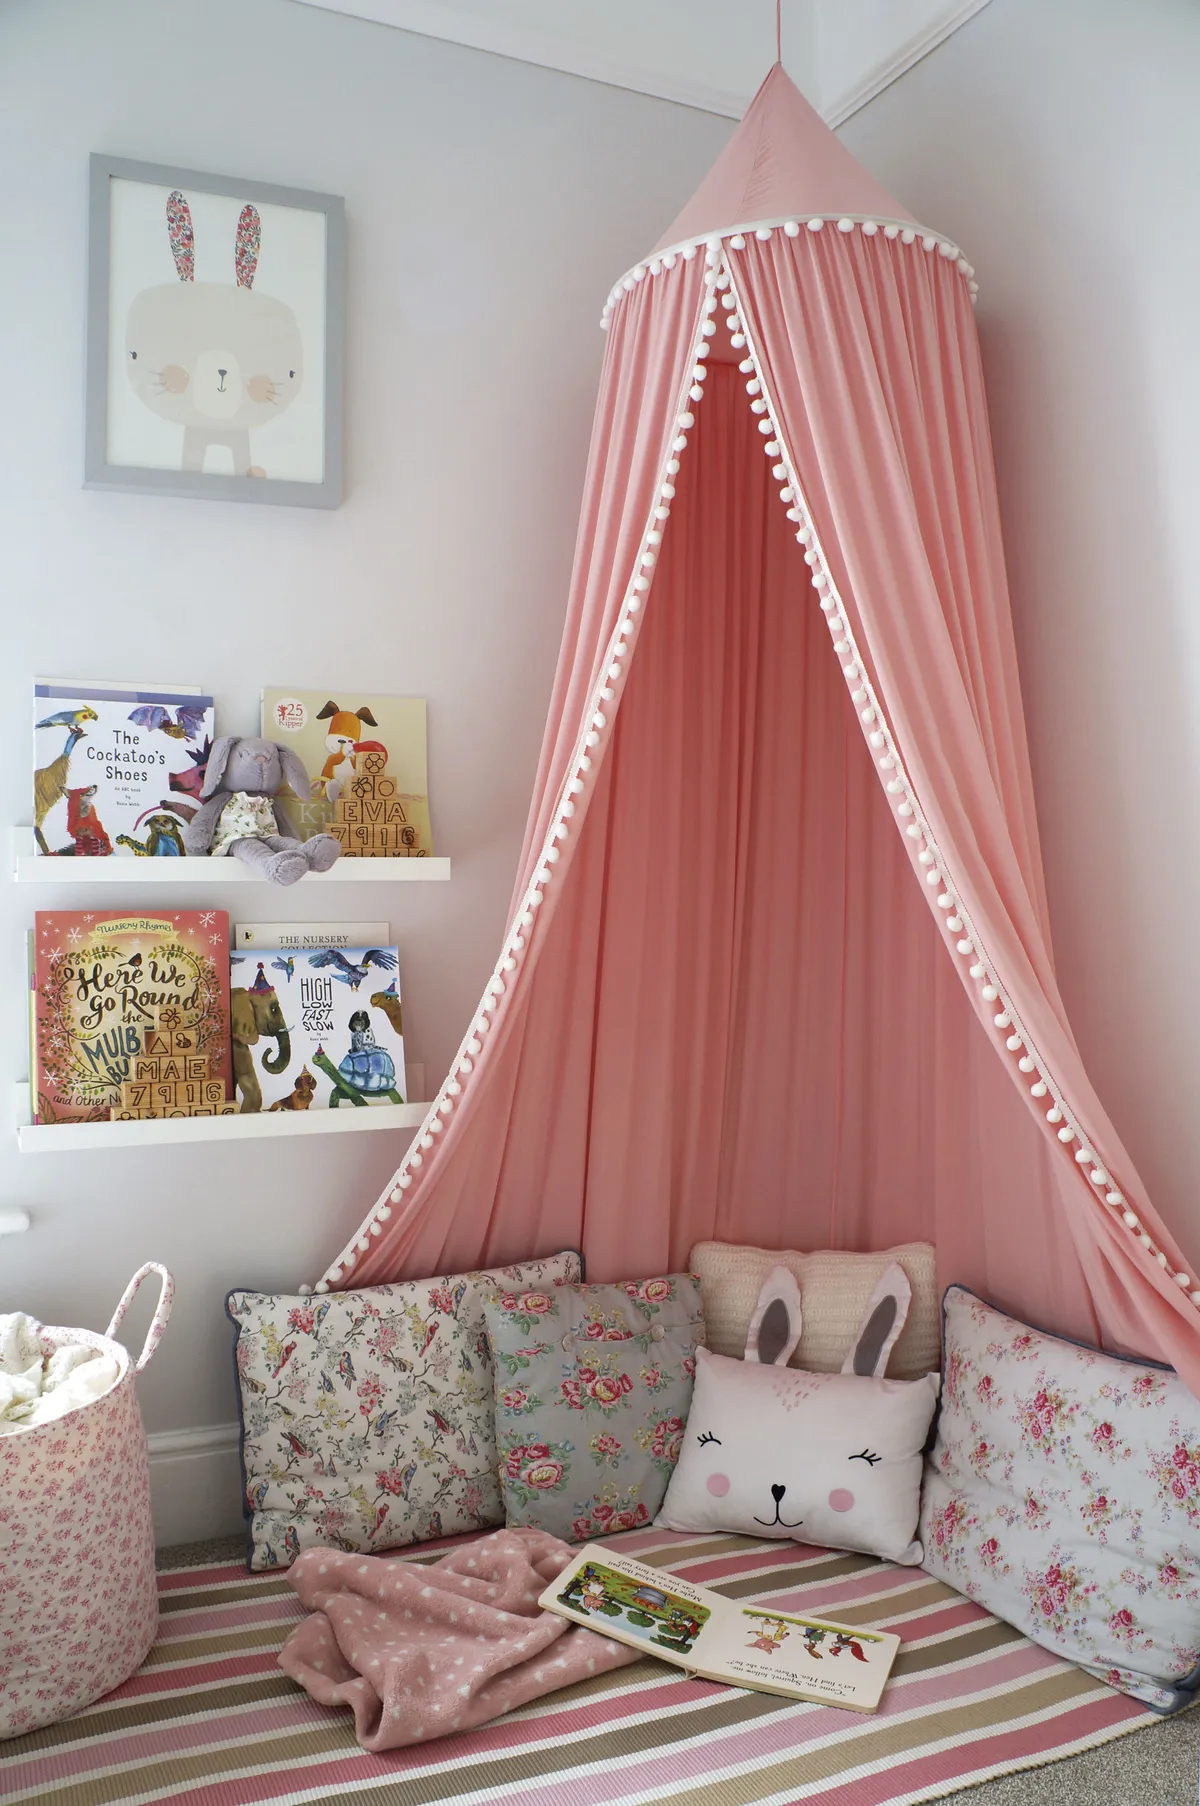 The hanging canopy in Mae and Eve’s reading corner was a £20 eBay bargain